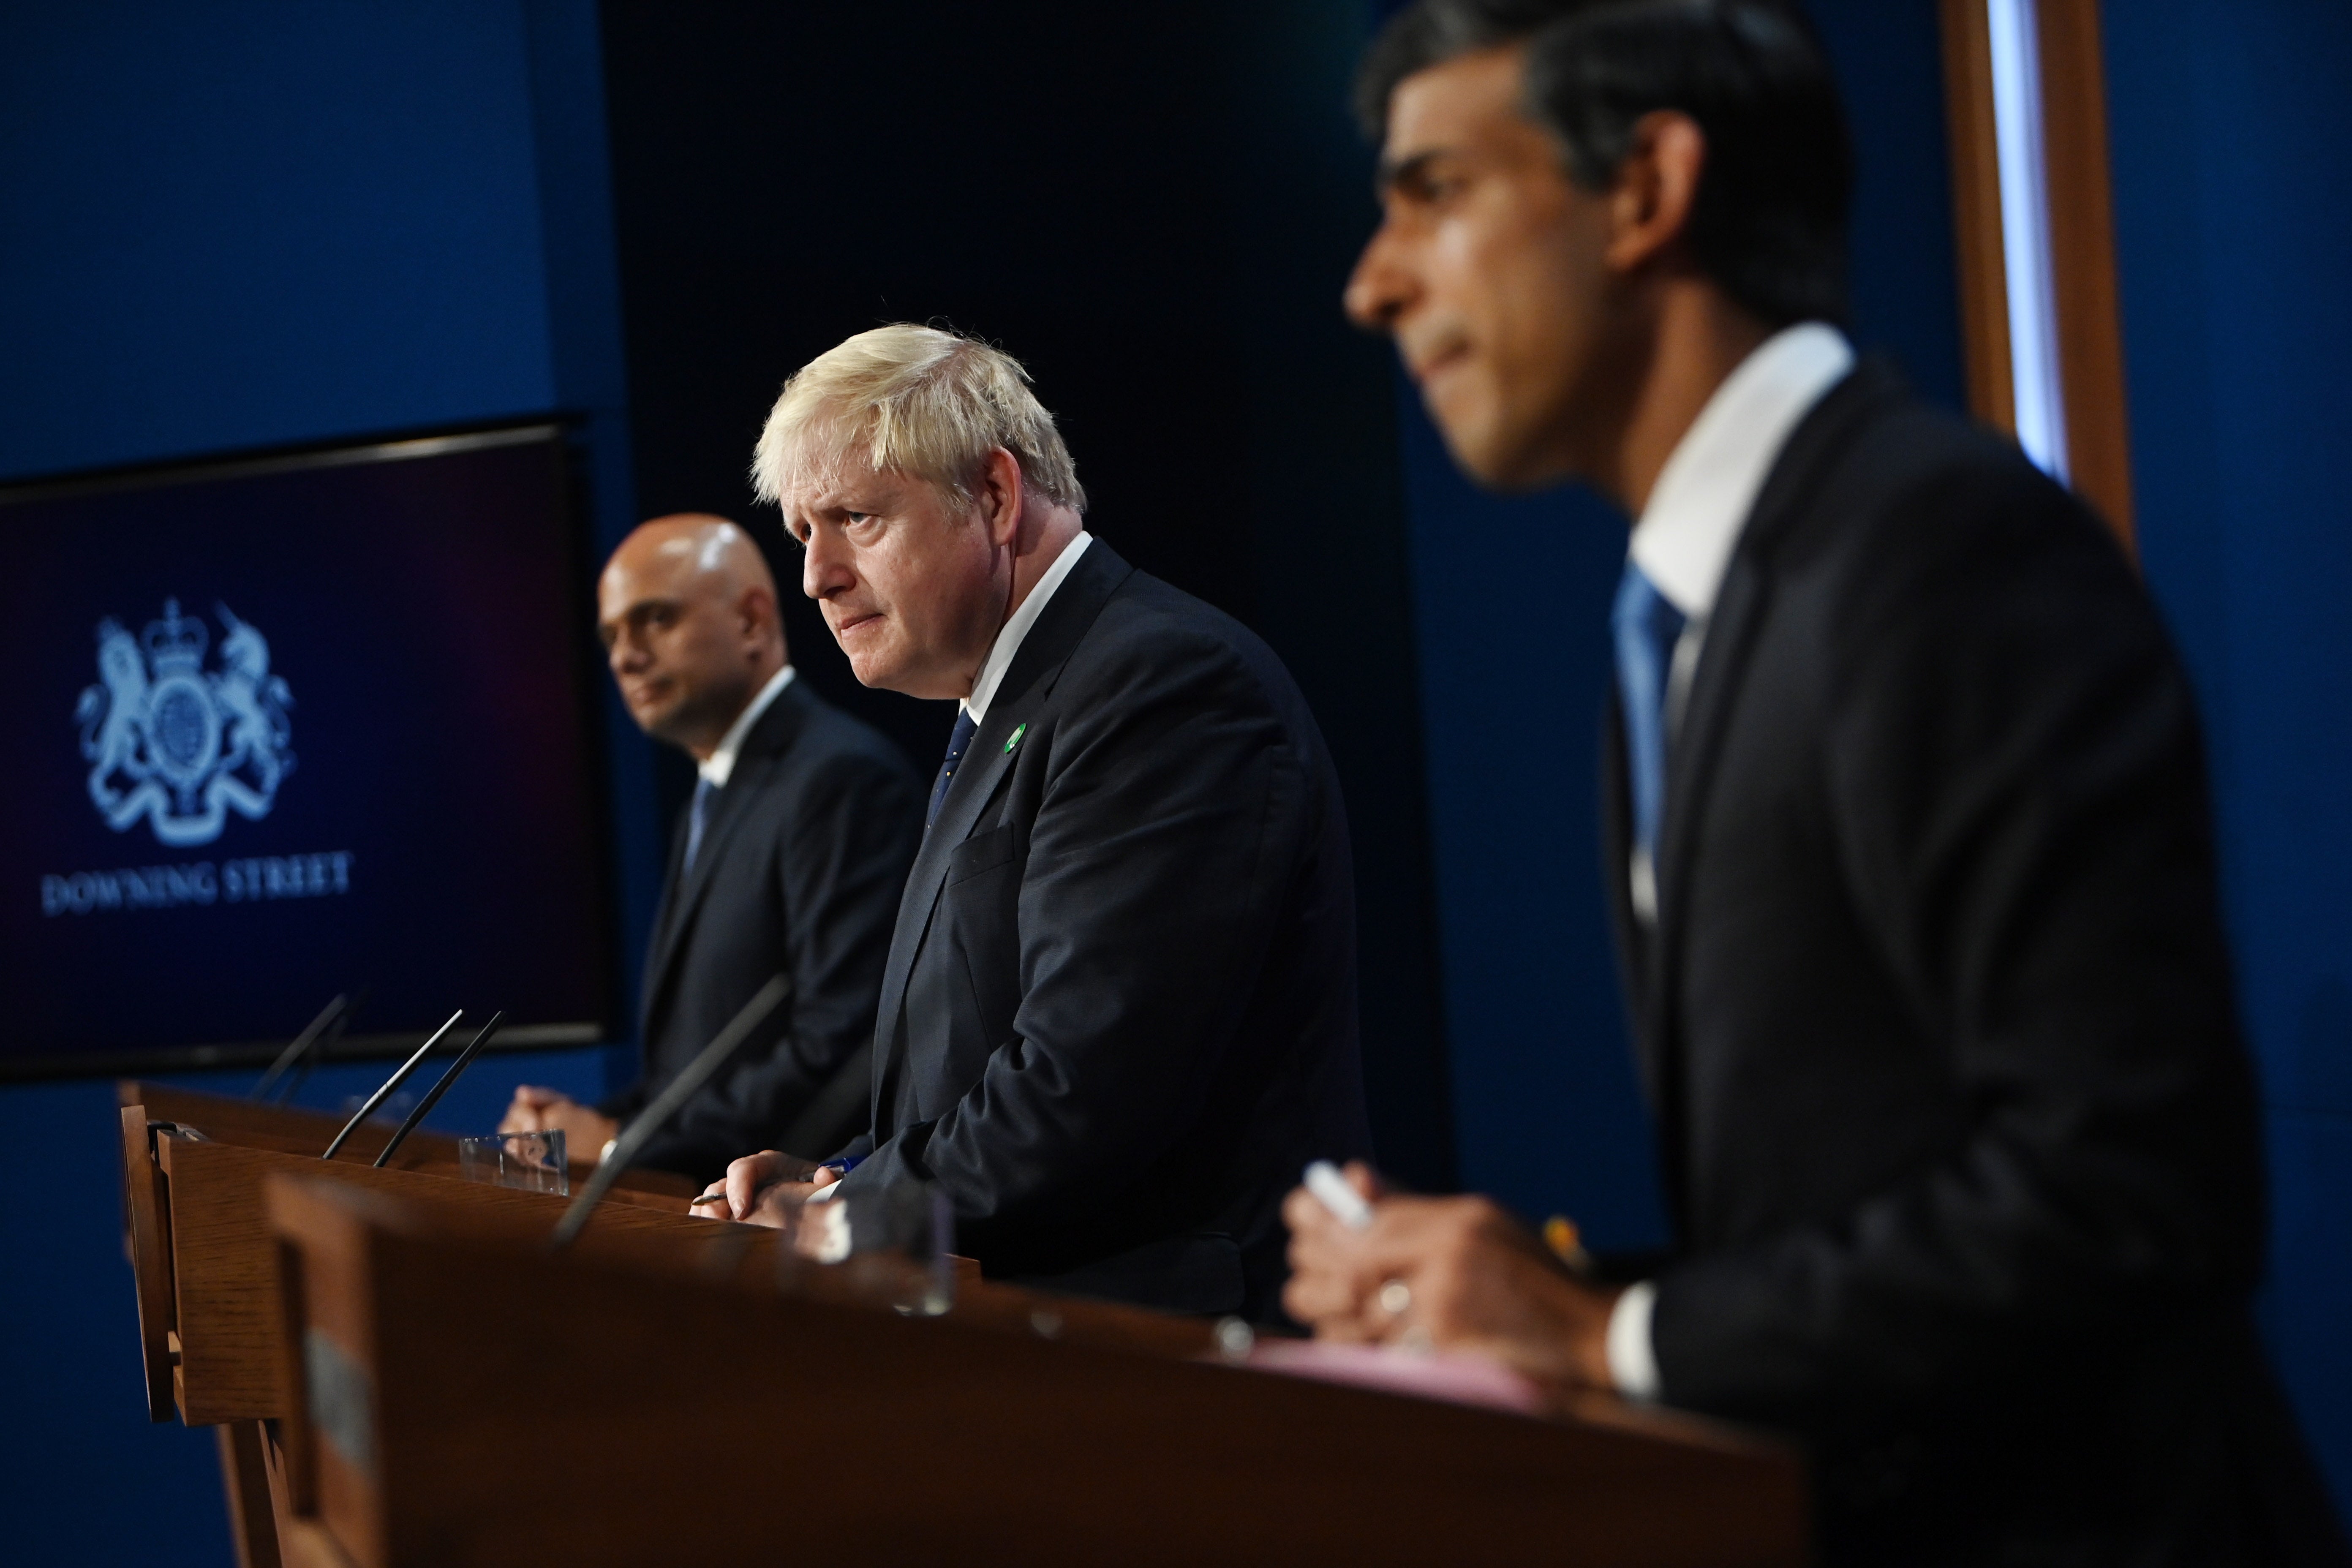 Javid, Johnson and Sunak reveal details about the new tax hike at a joint press conference